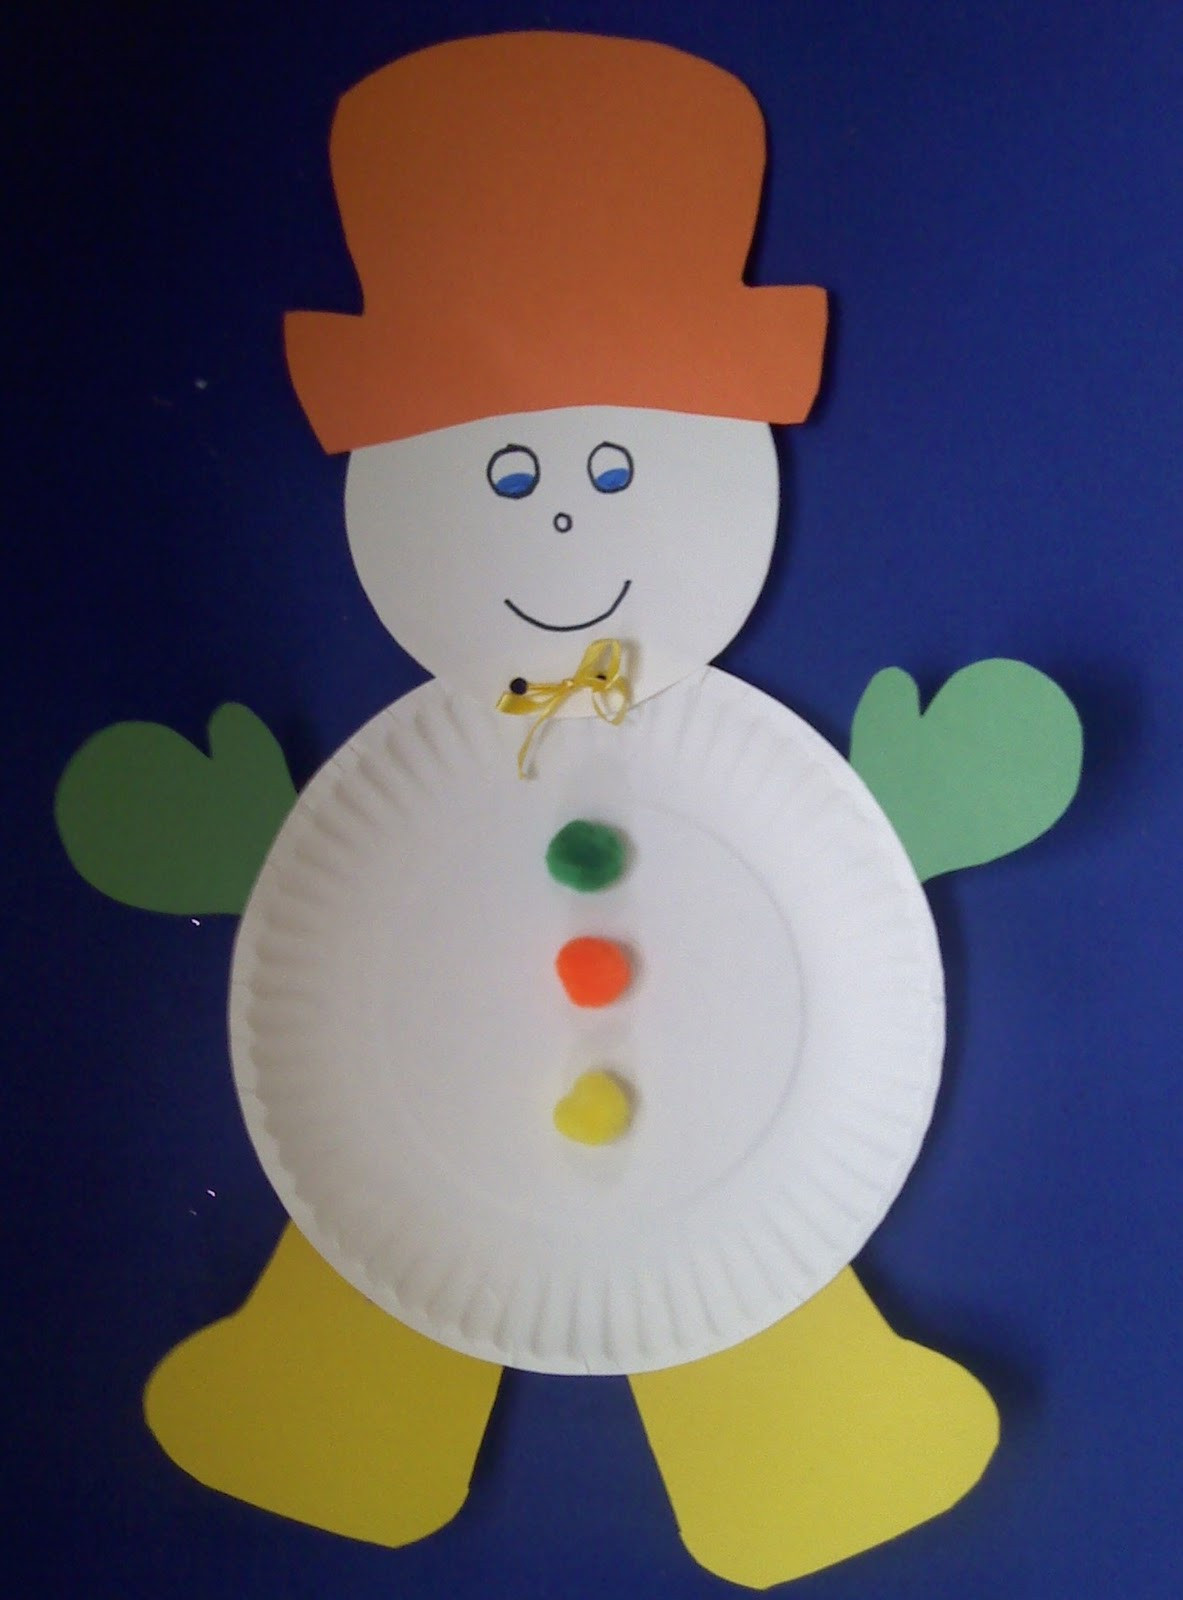 Arts And Crafts For Preschoolers
 Crafts For Preschoolers January 2012